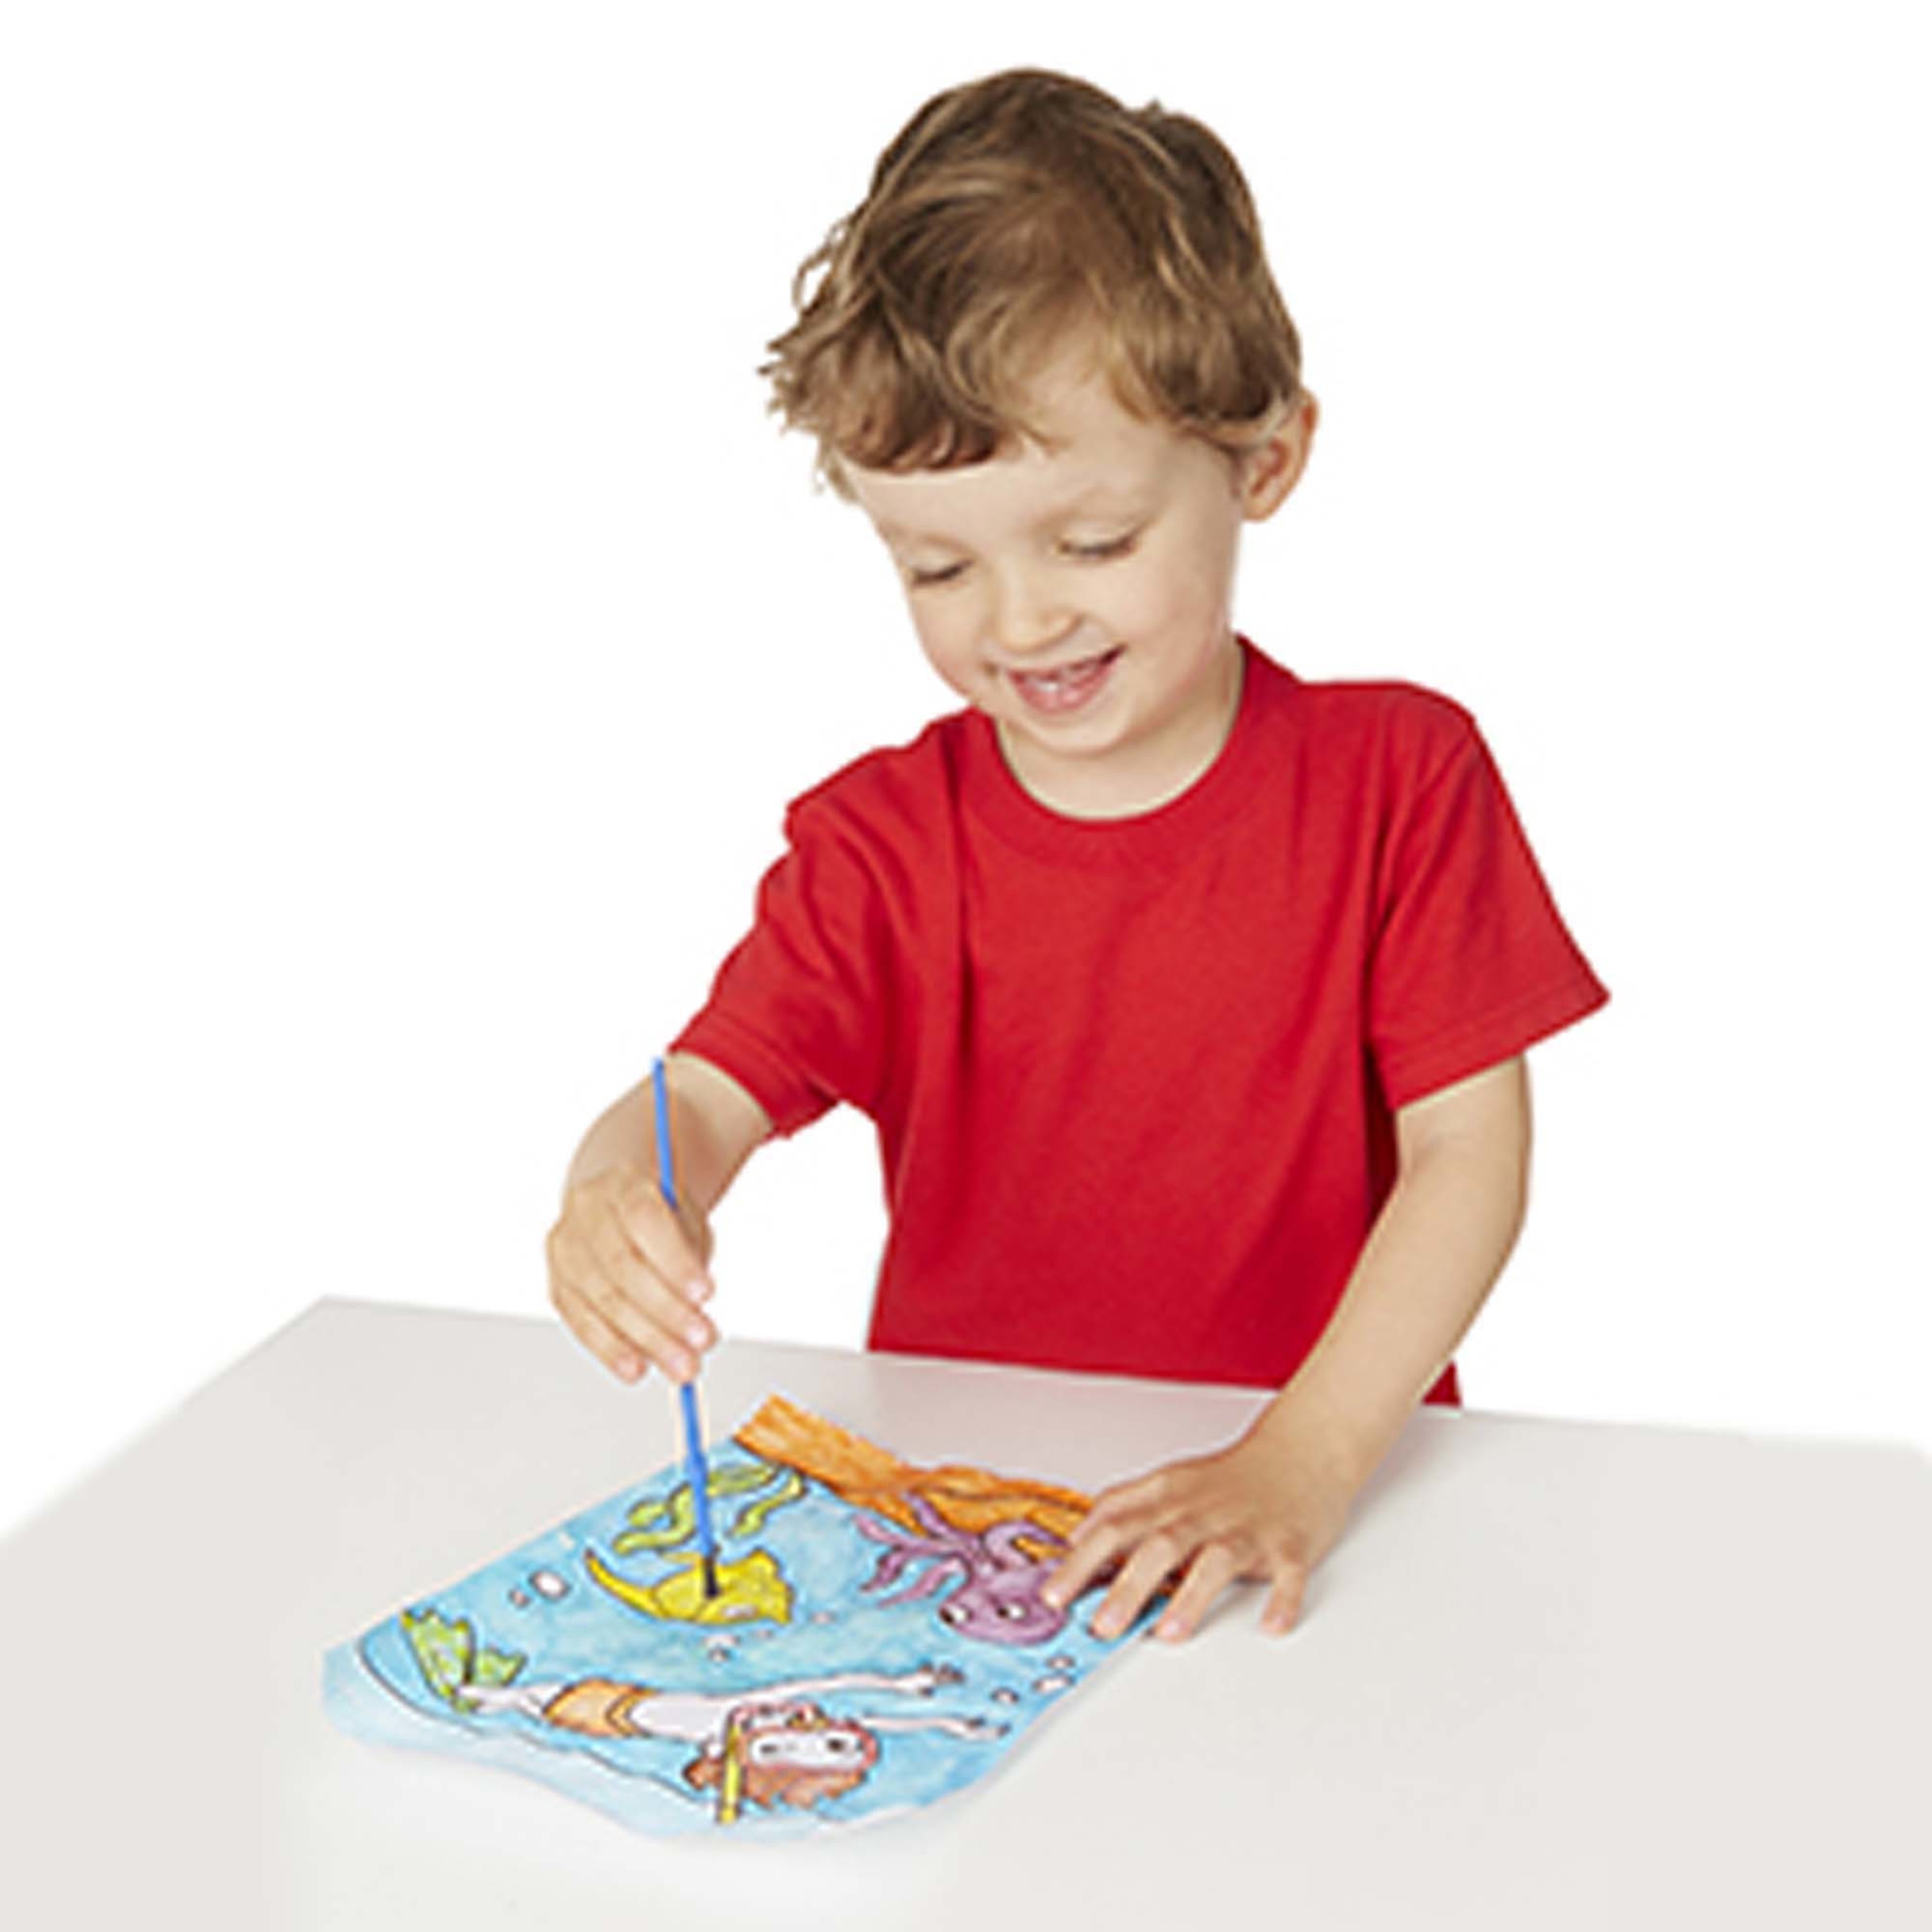 Melissa & Doug My First Paint With Water Activity Books 3-Pack - Animals,  Vehicles, and Pirates 